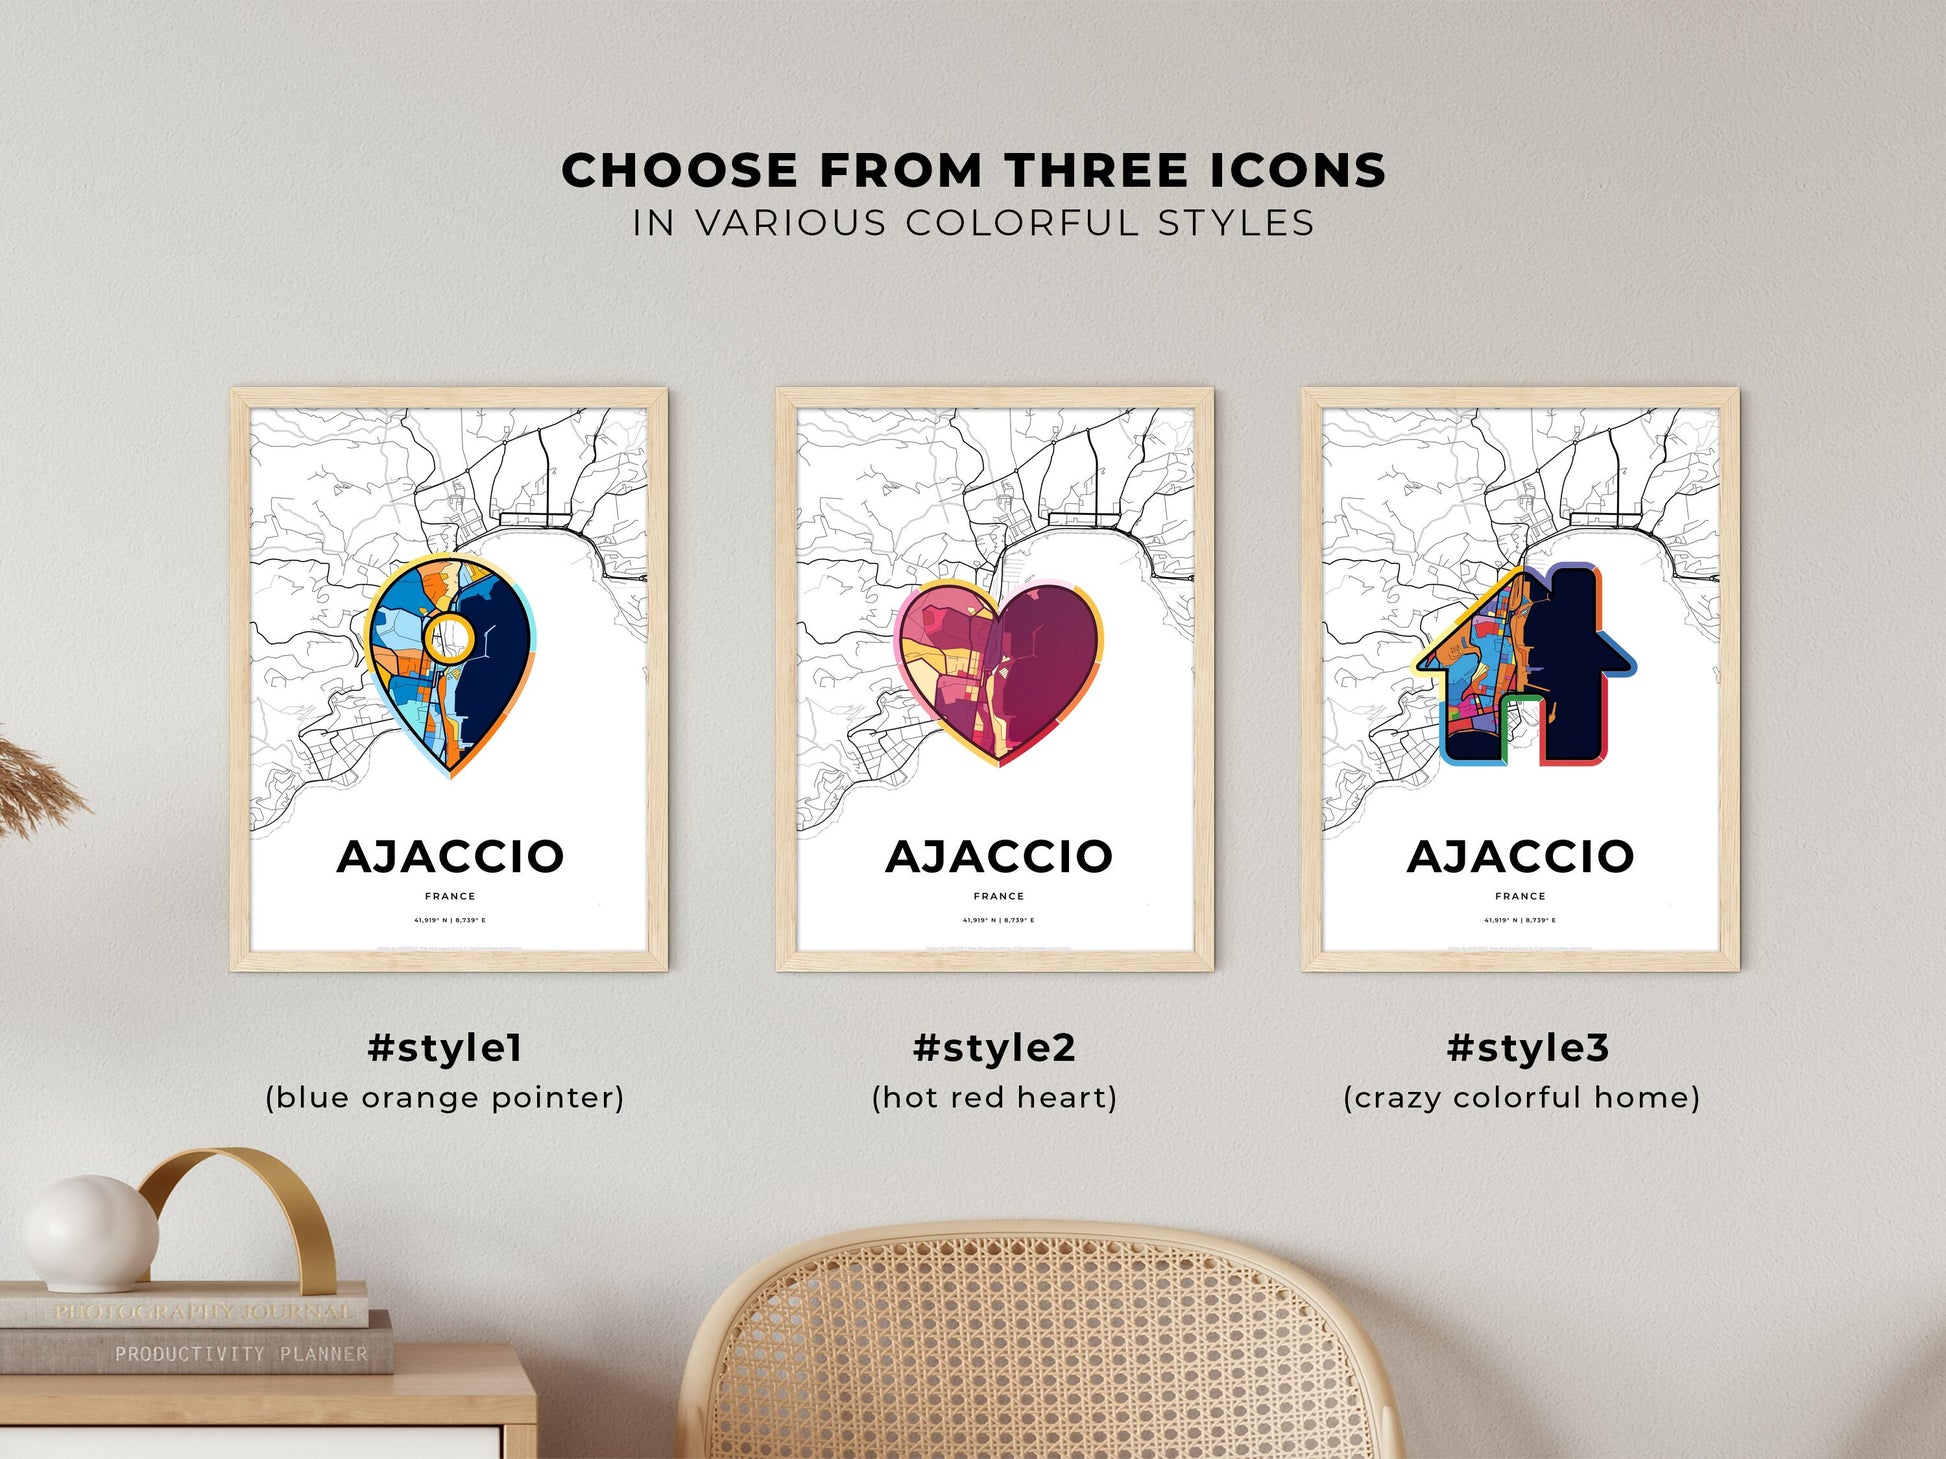 AJACCIO FRANCE minimal art map with a colorful icon. Where it all began, Couple map gift.